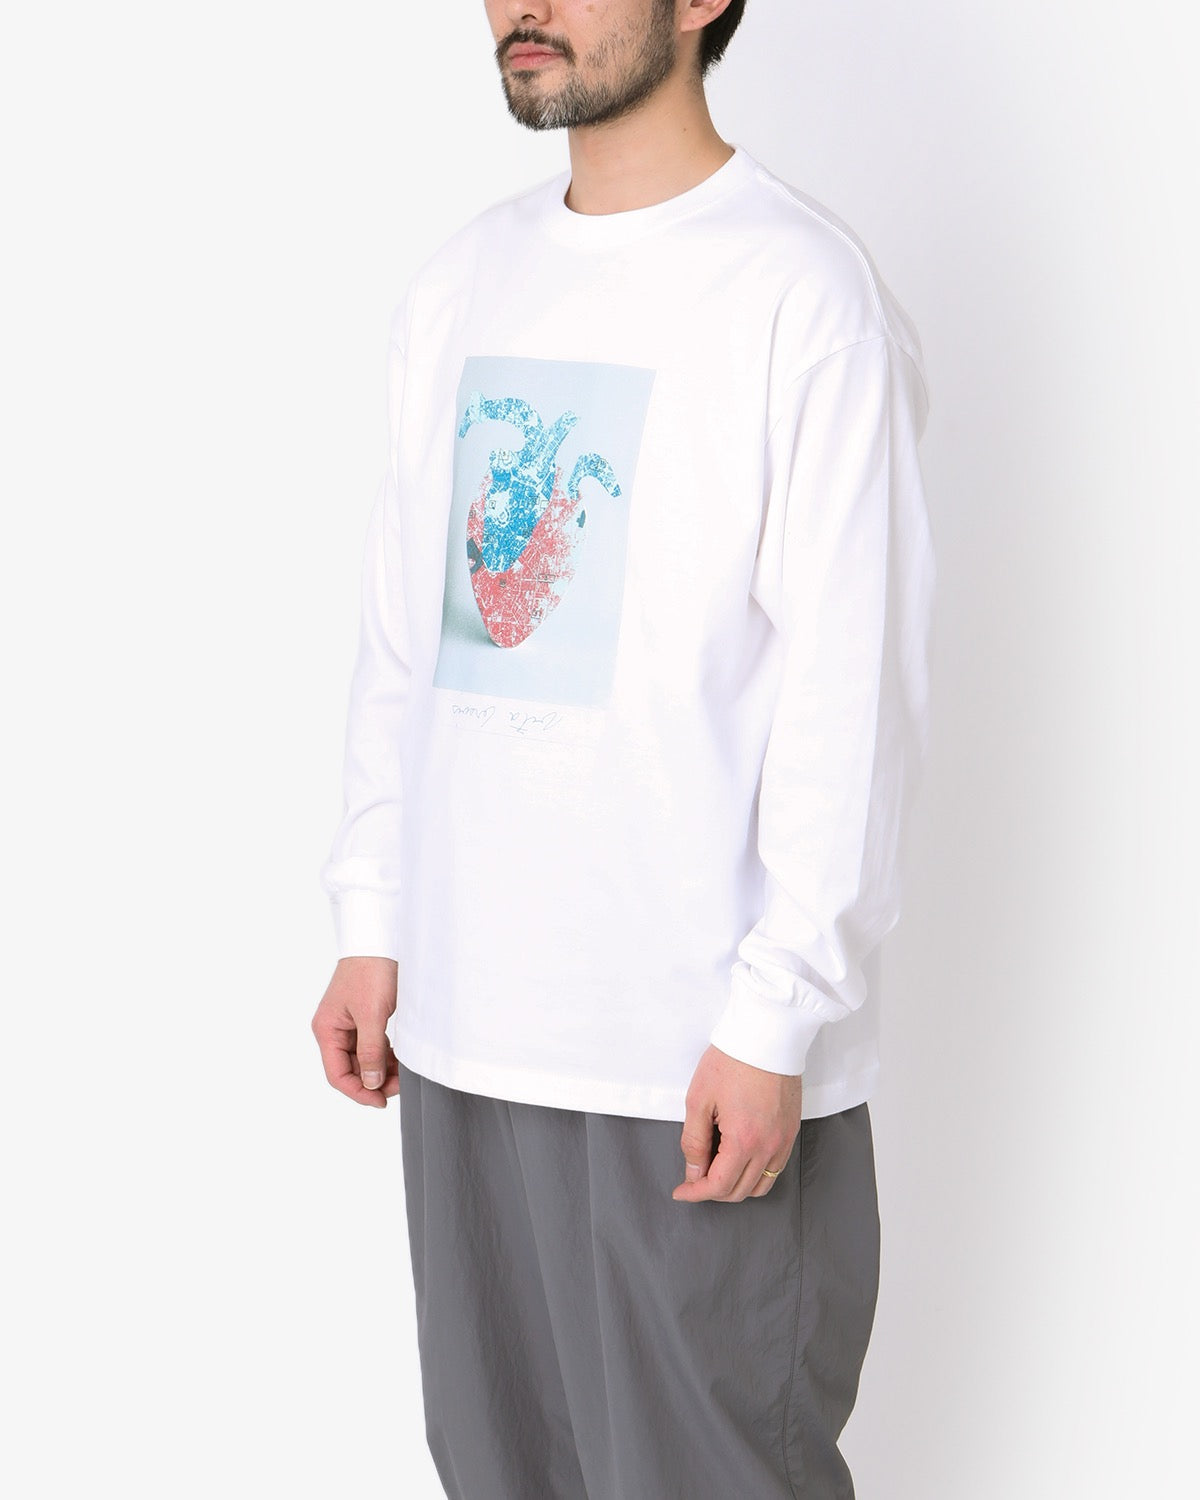 KILLIMAN JAH LOW WORKS COLLAGE 02 LONG SLEEVE T-SHIRT